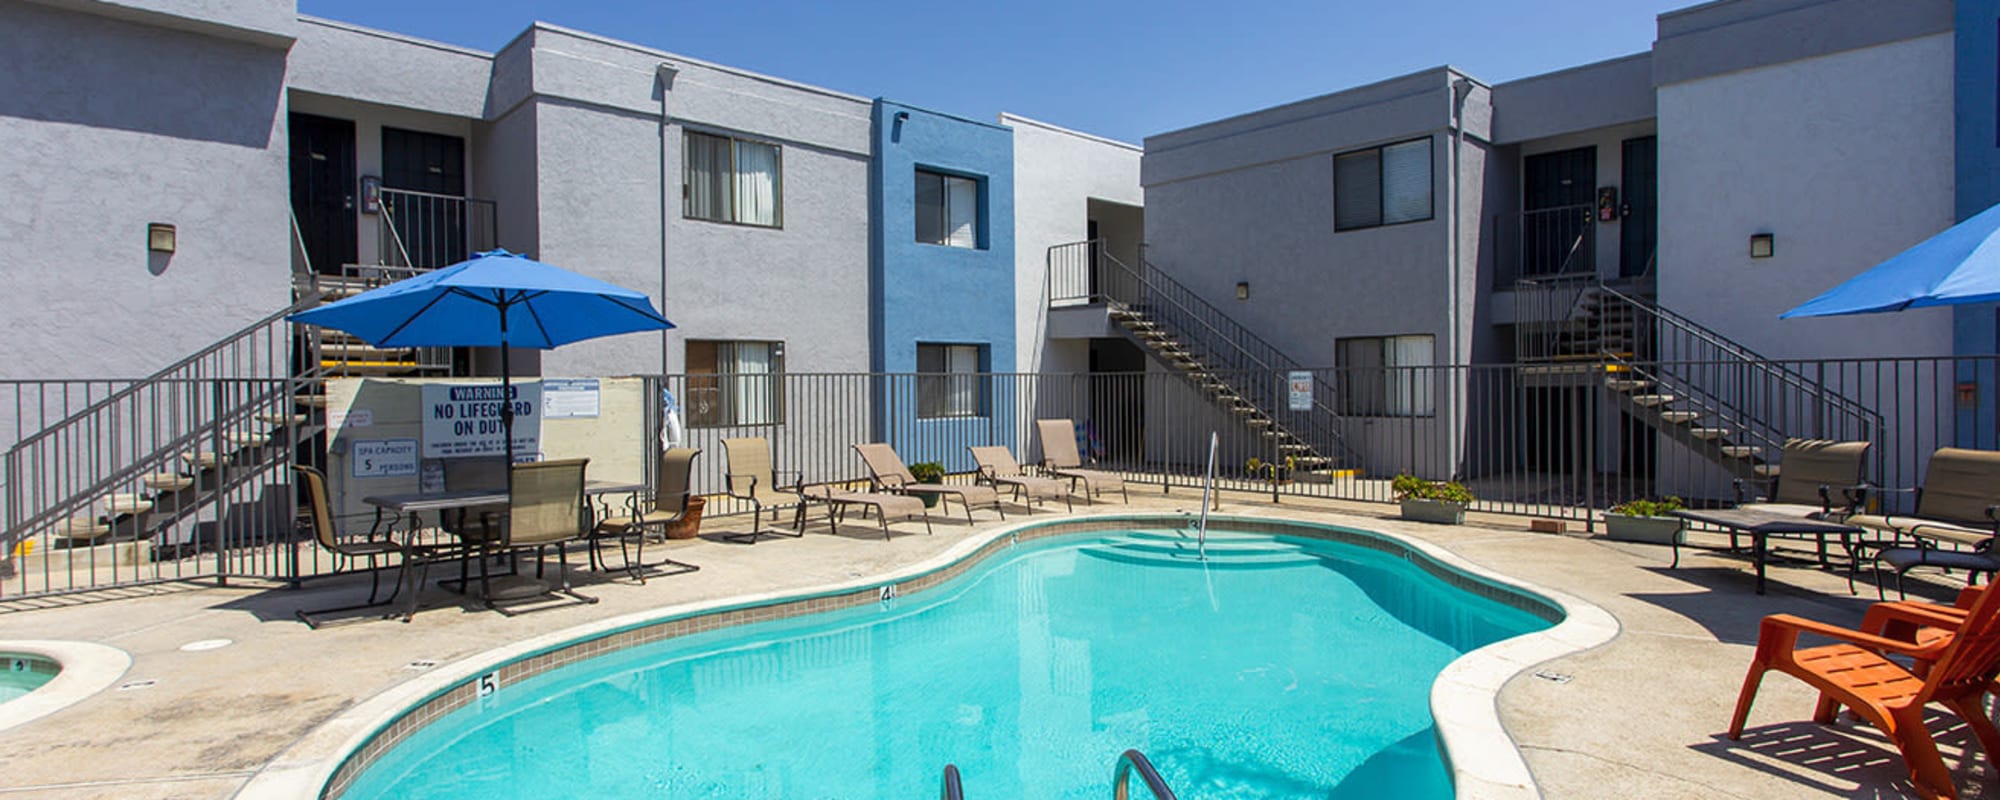 Pool with lounge chairs at San Diego, California, apartments at Bridgeview Apartments